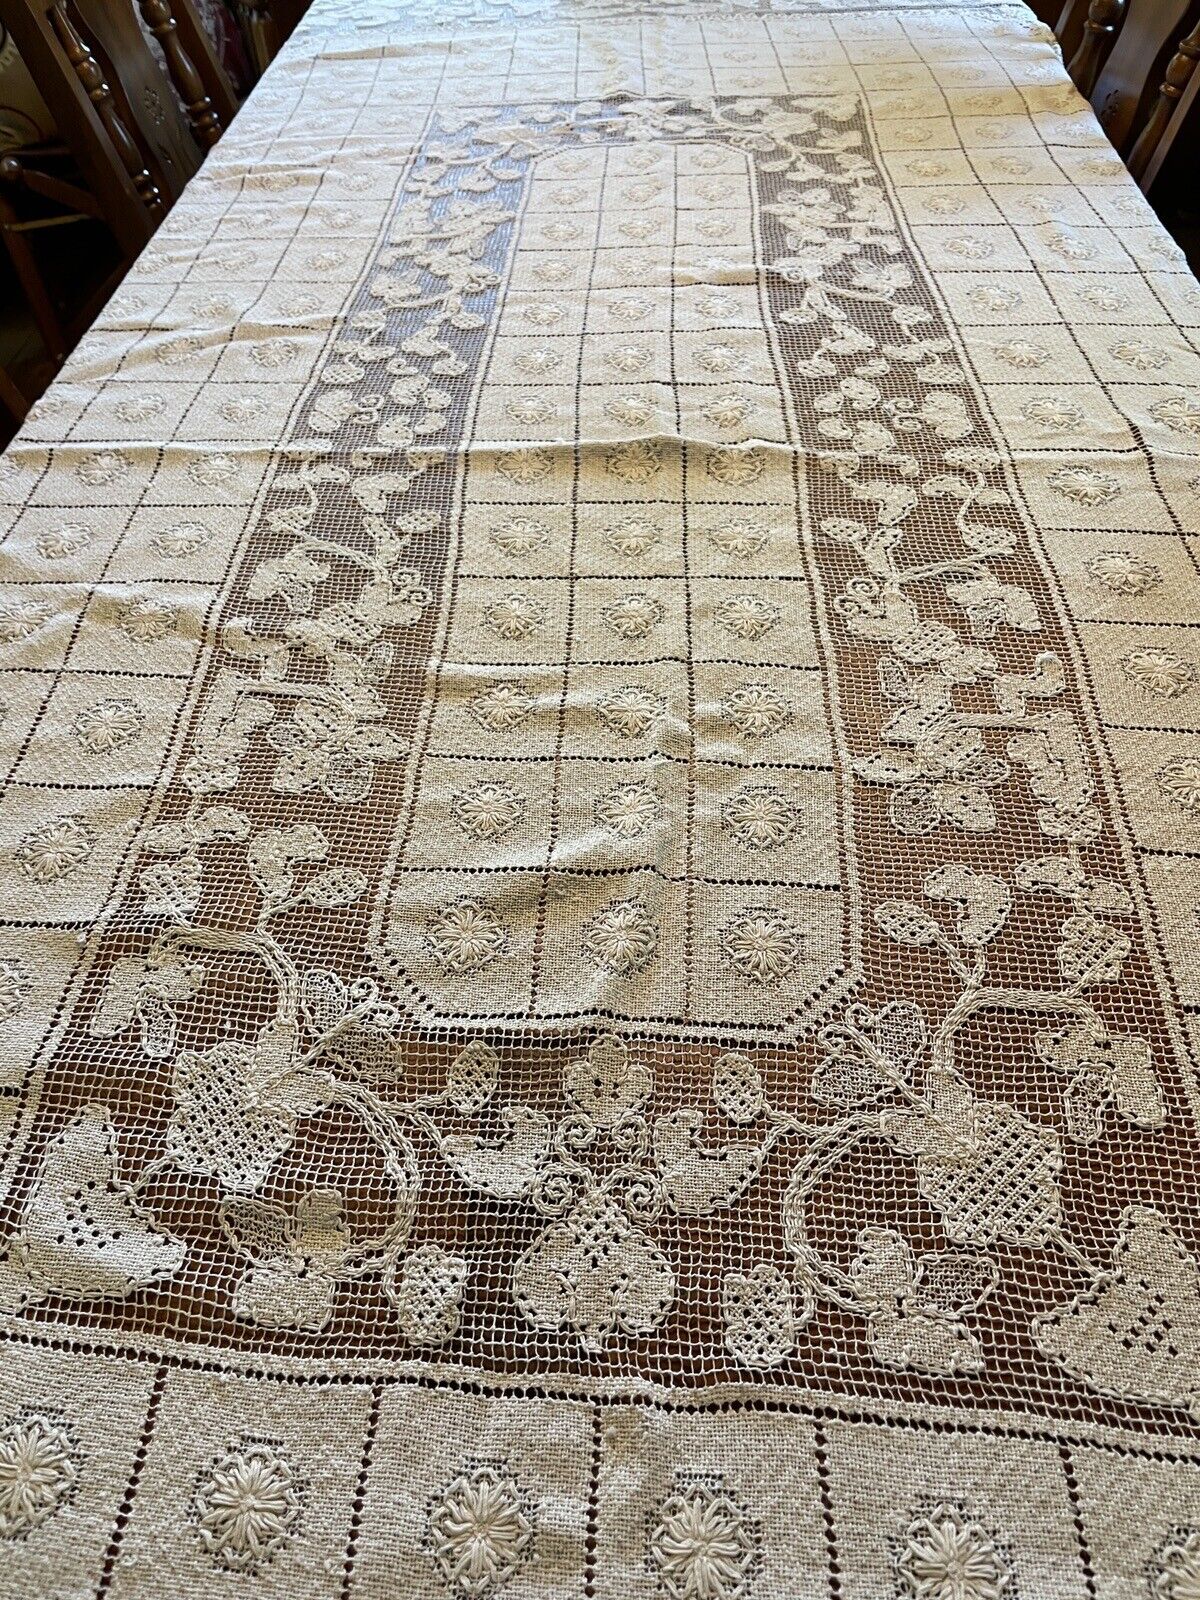 Beautiful Vintage Handmade Linen Embroidered Crochet Floral Table Cloth 58 X 90”